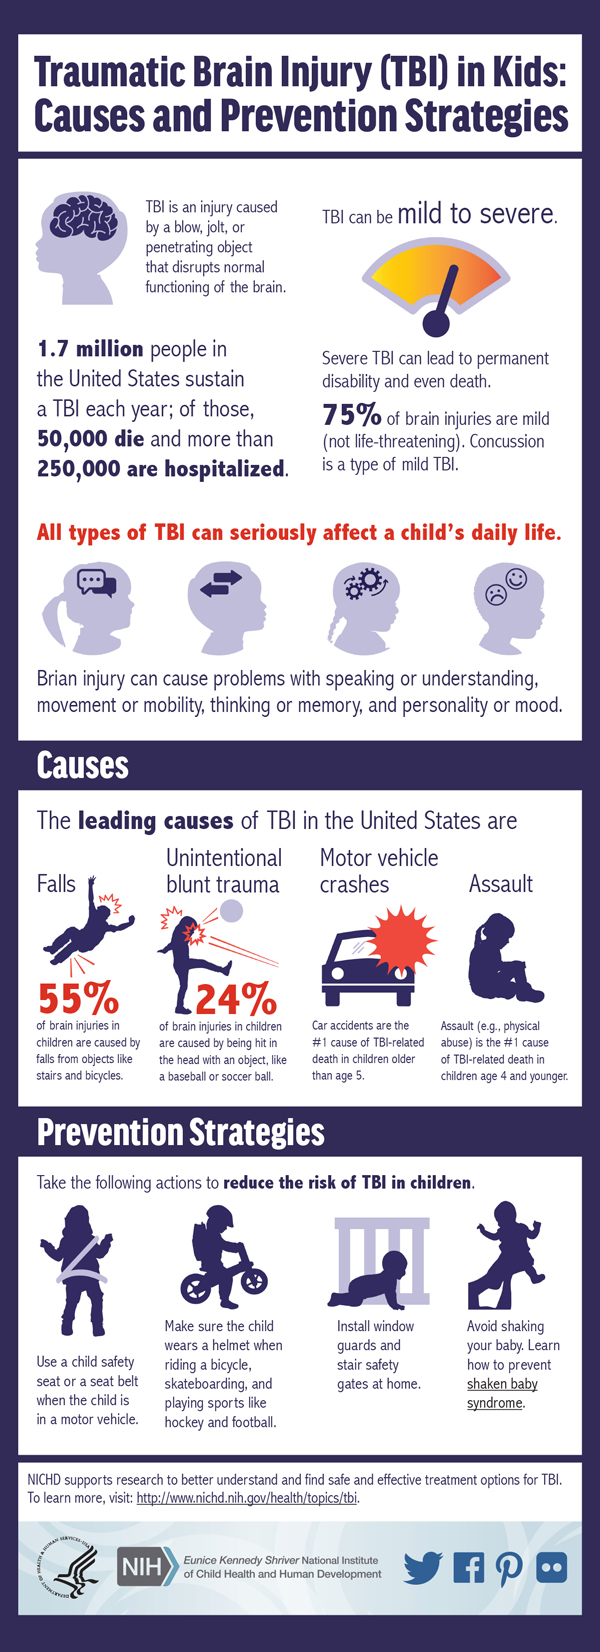 This infographic presents the leading causes of traumatic brain injury (TBI) in children and offers key TBI prevention strategies.